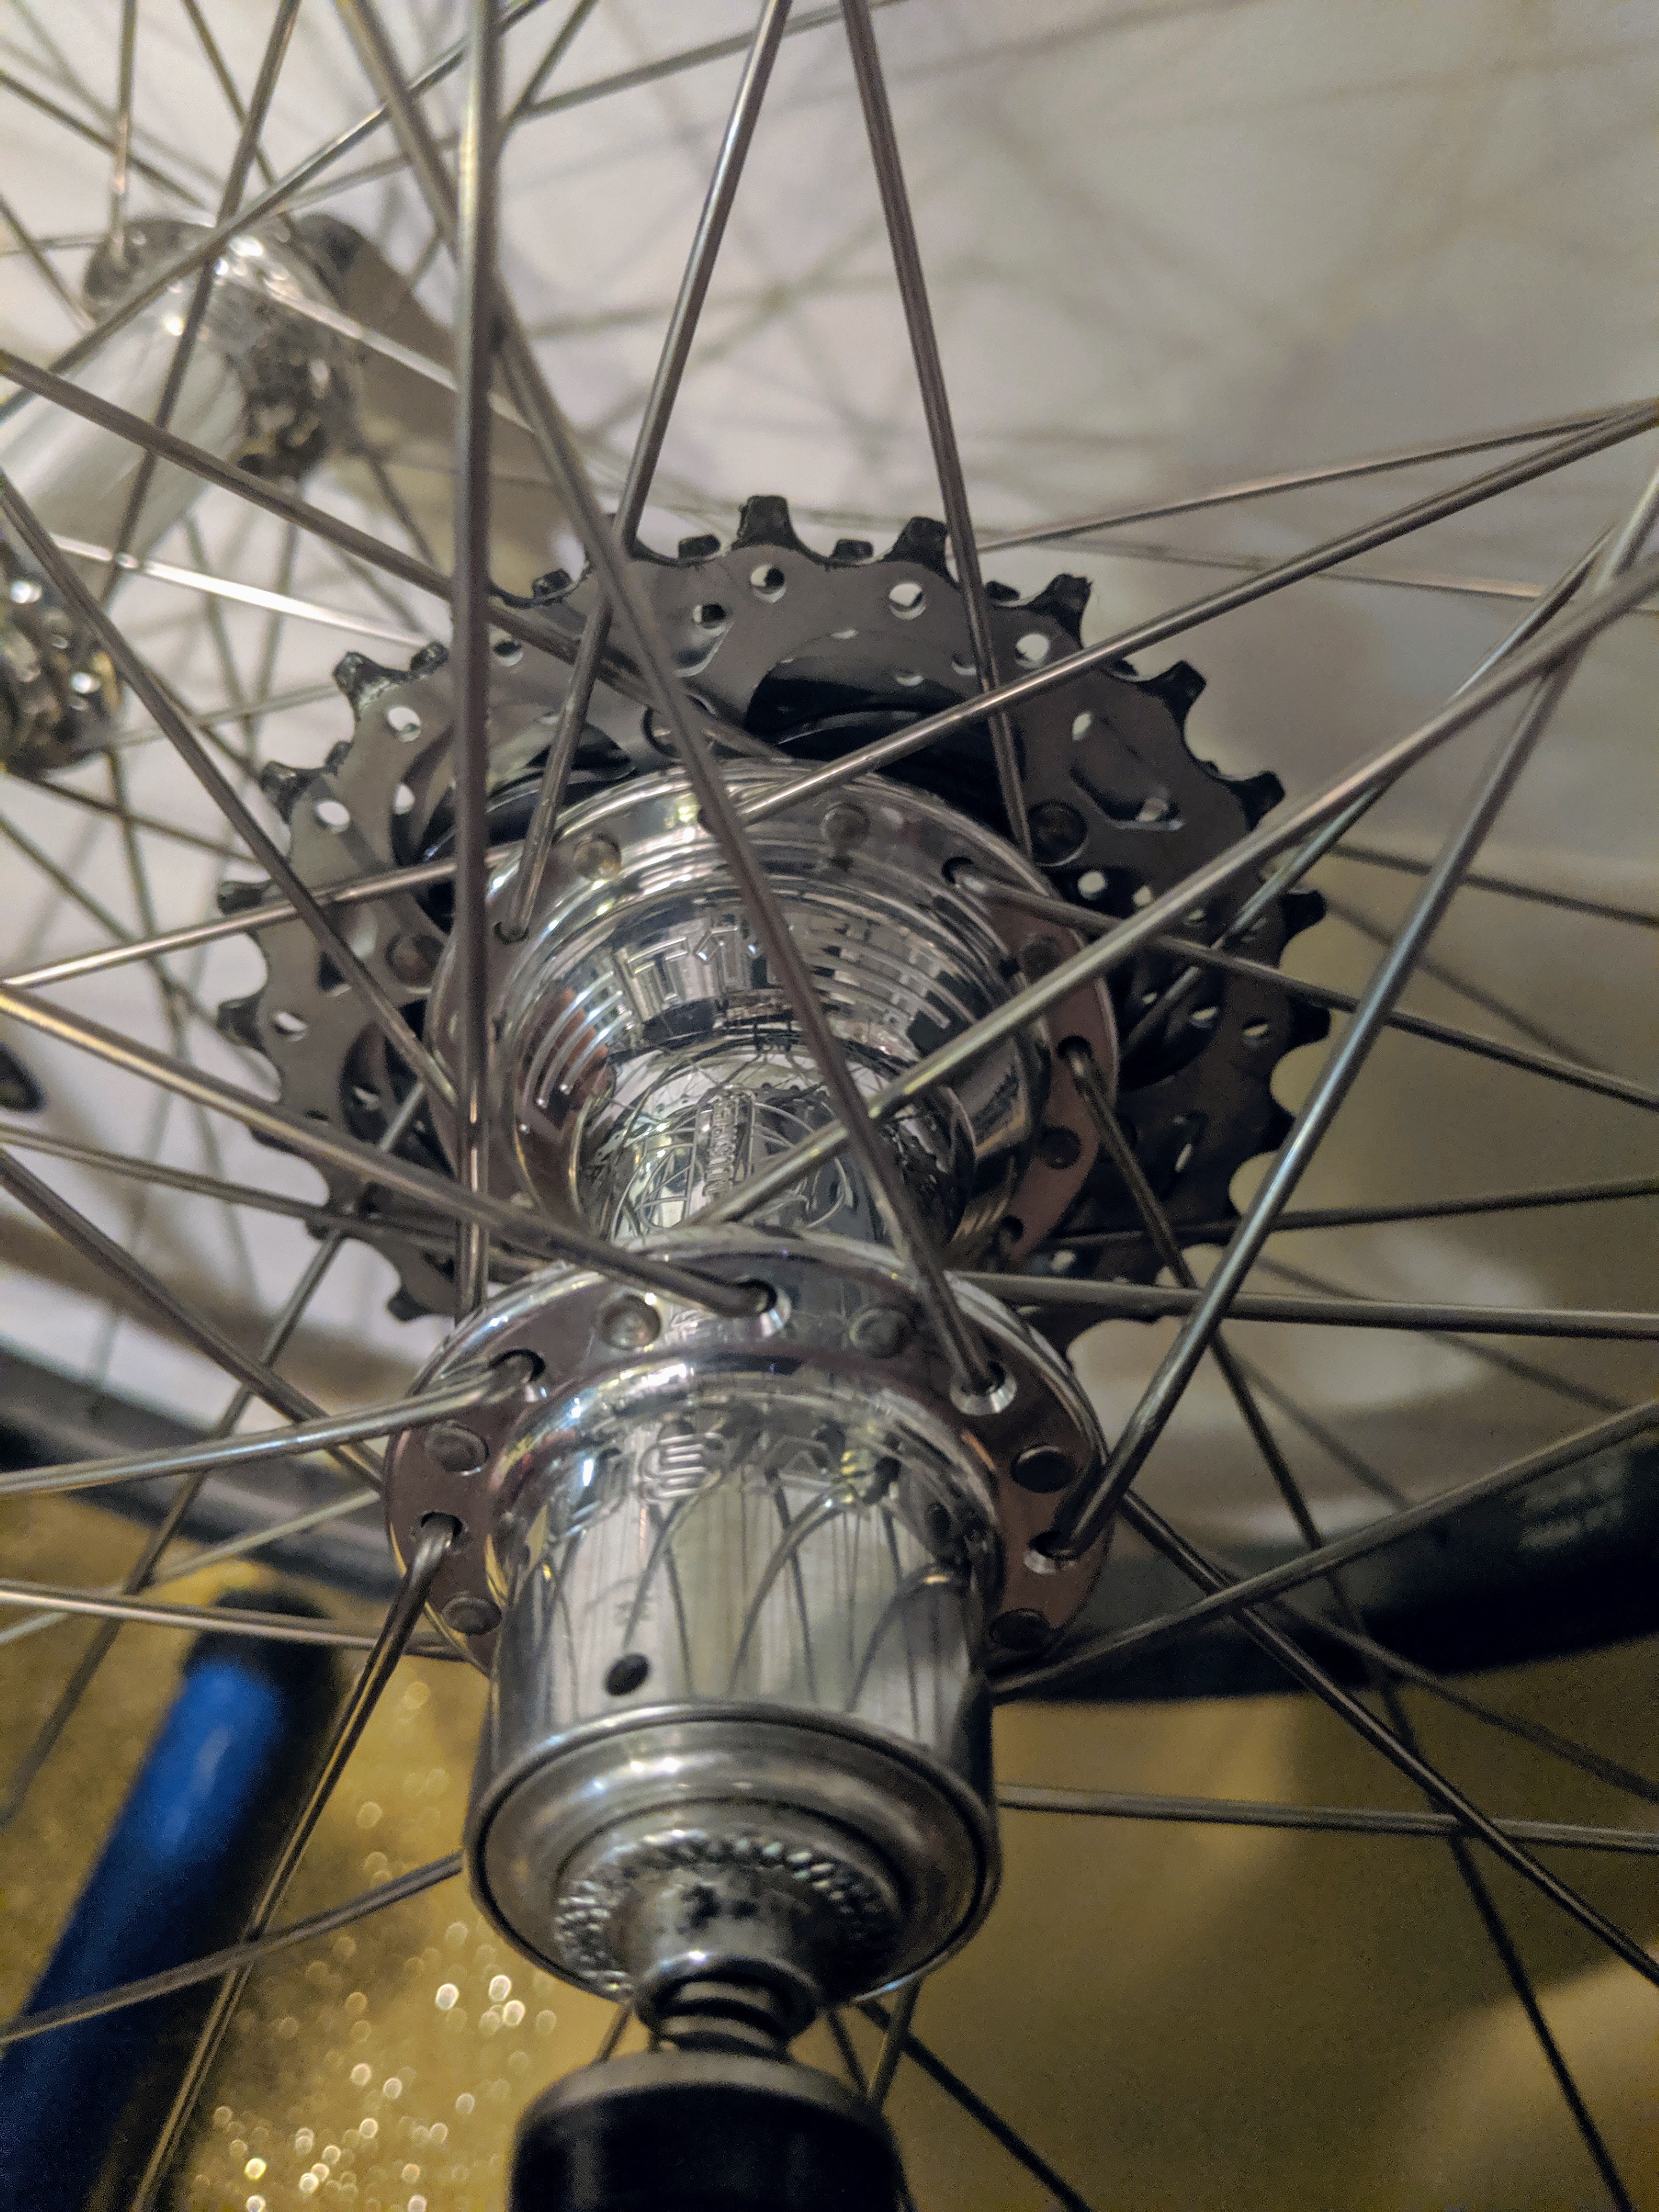 Ambrosio-Nemesis-to-White-Industry-Hubs-Campy-body-and-cassette-tubular-wheelset-2